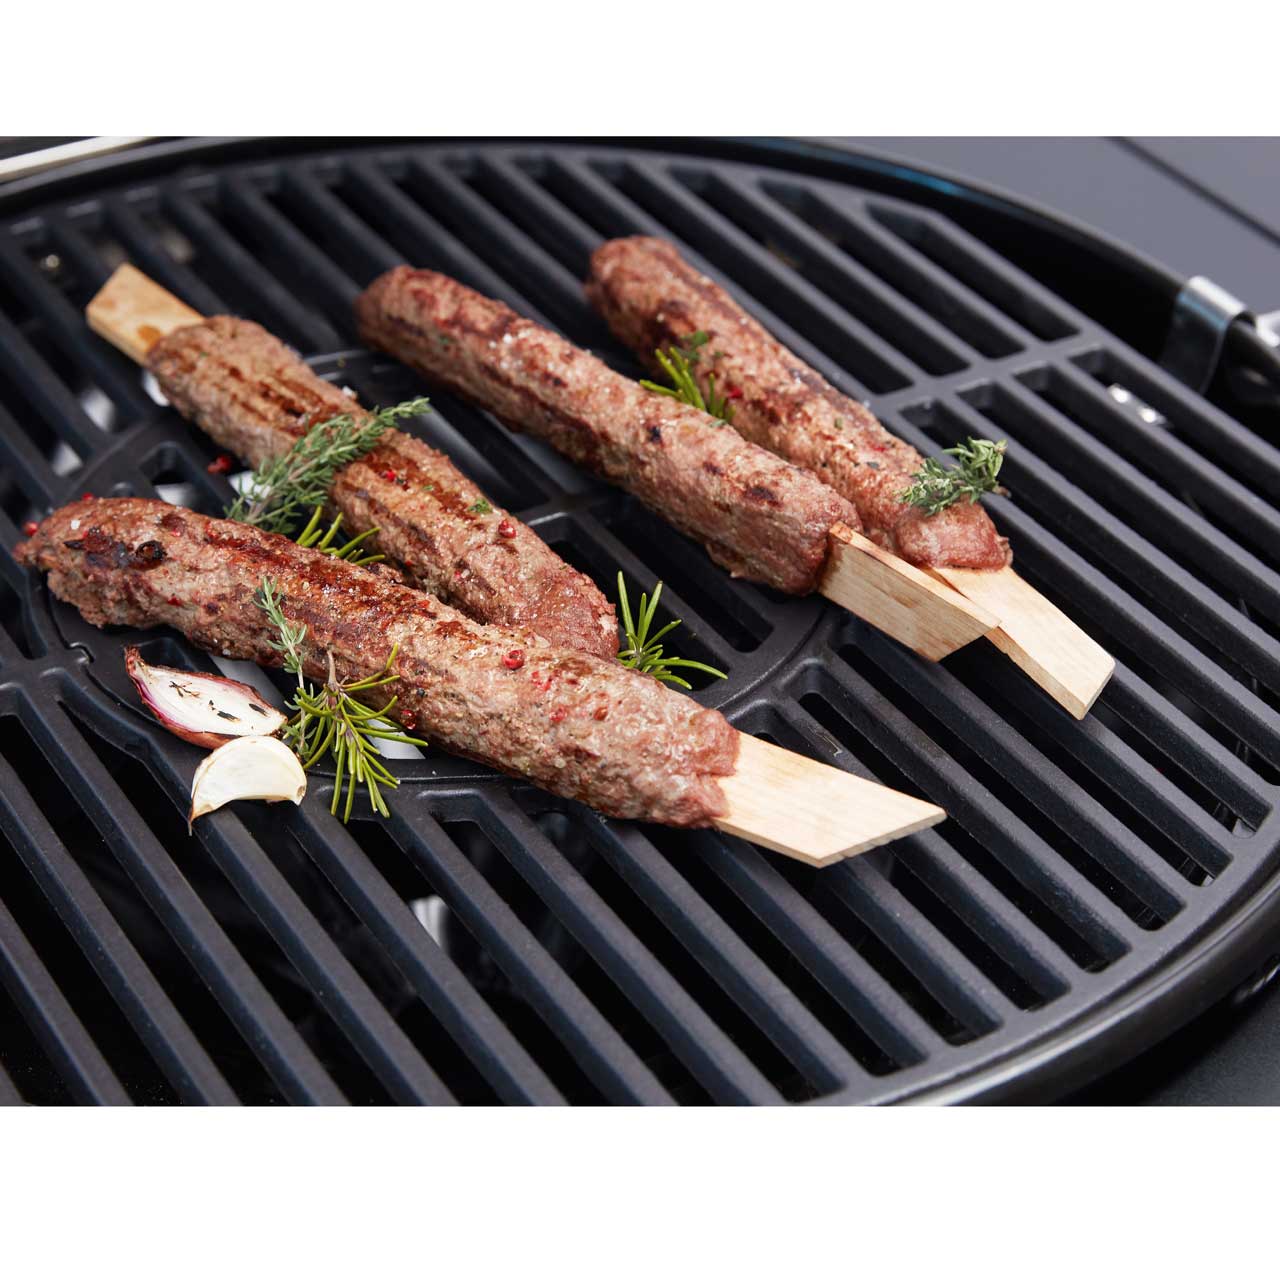 Axtschlag - Aromatic Barbecue Skewers (Kebab)